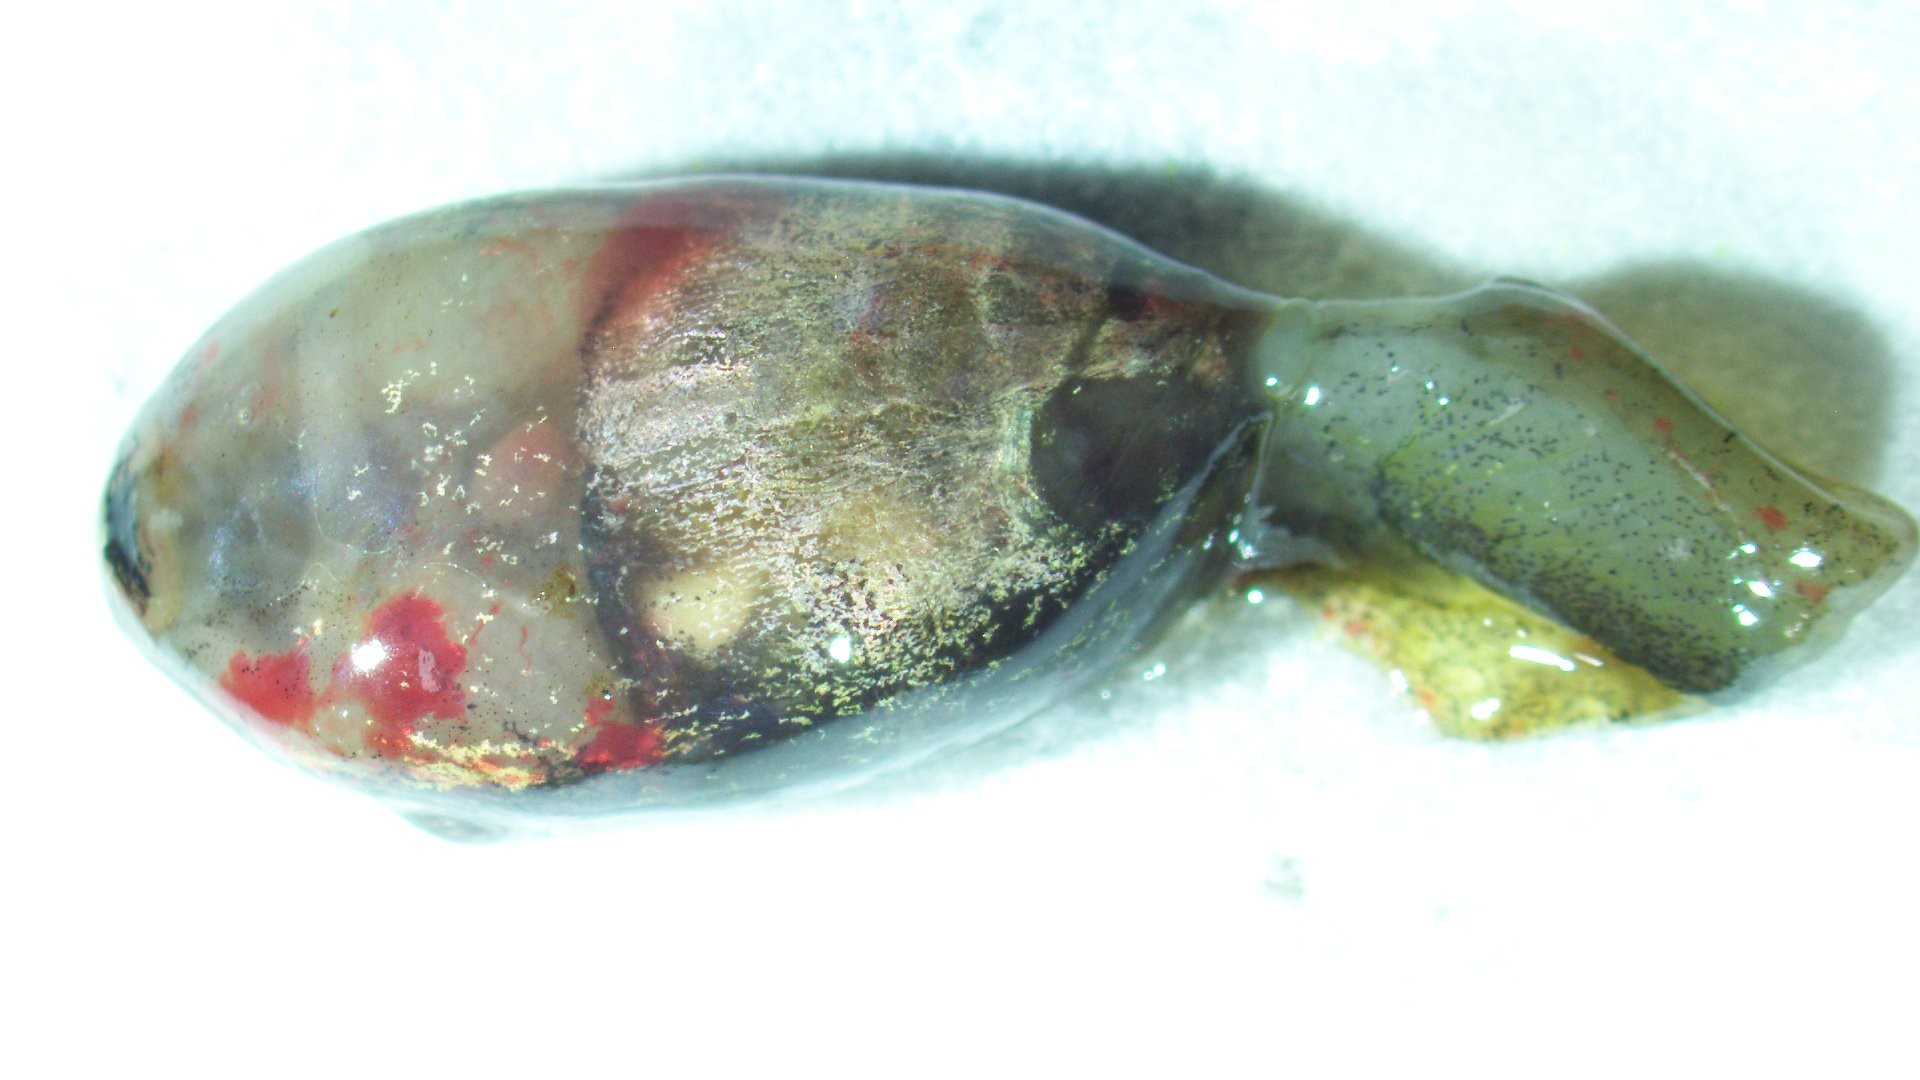 tadpole with discolored body